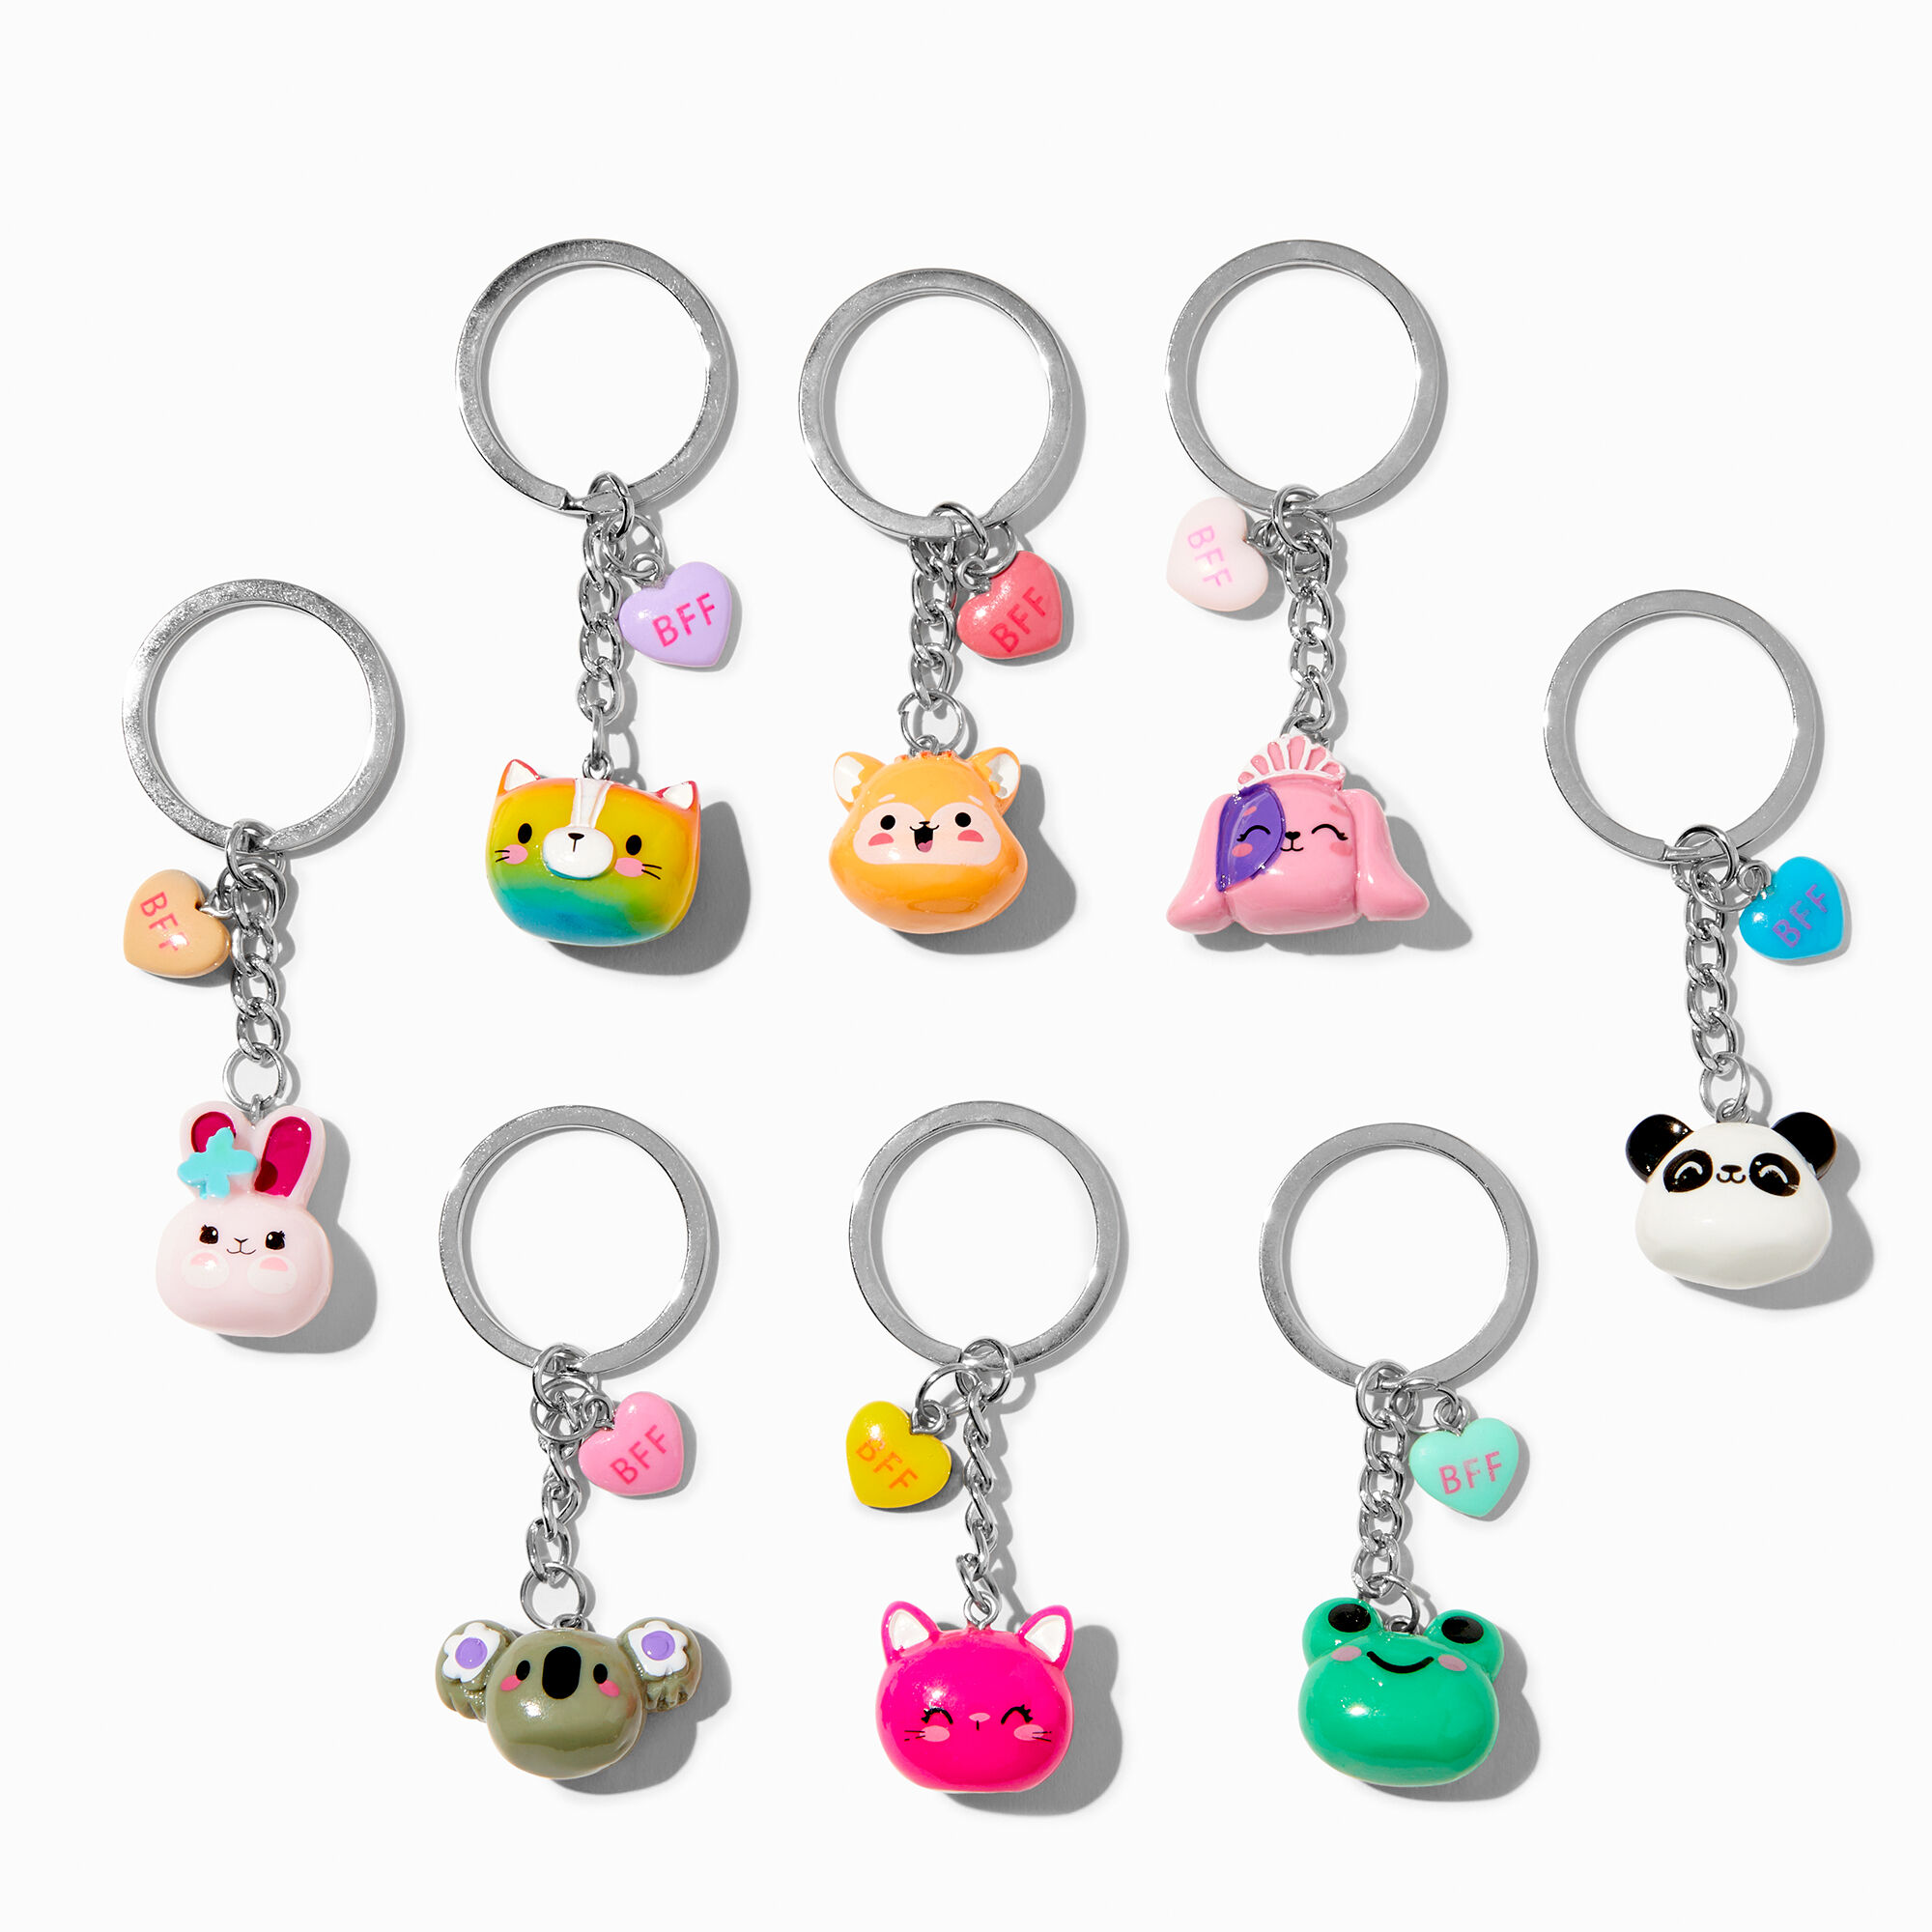 View Claires Critter Best Friends Keyrings 8 Pack Silver information